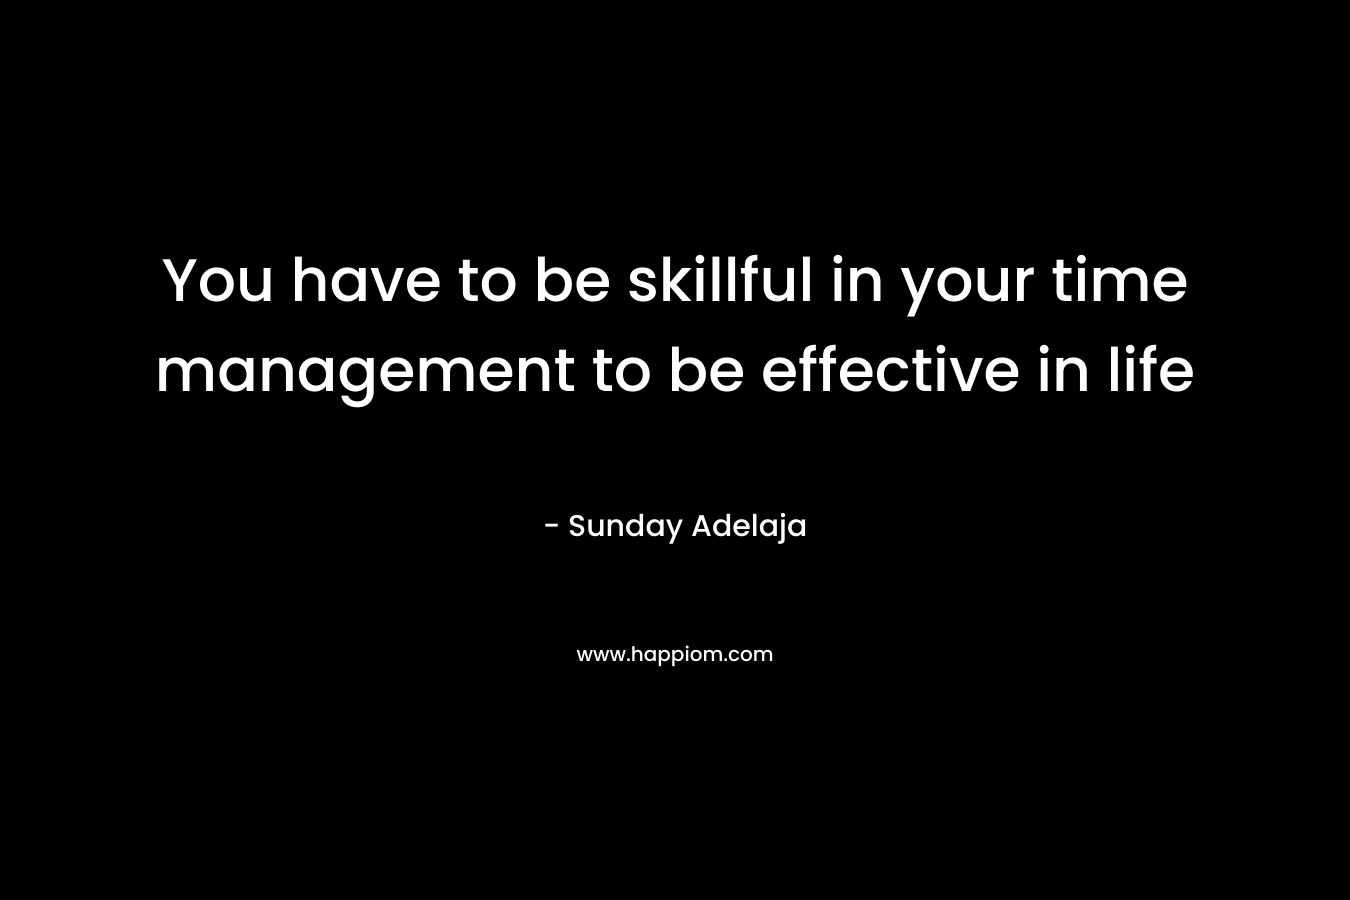 You have to be skillful in your time management to be effective in life